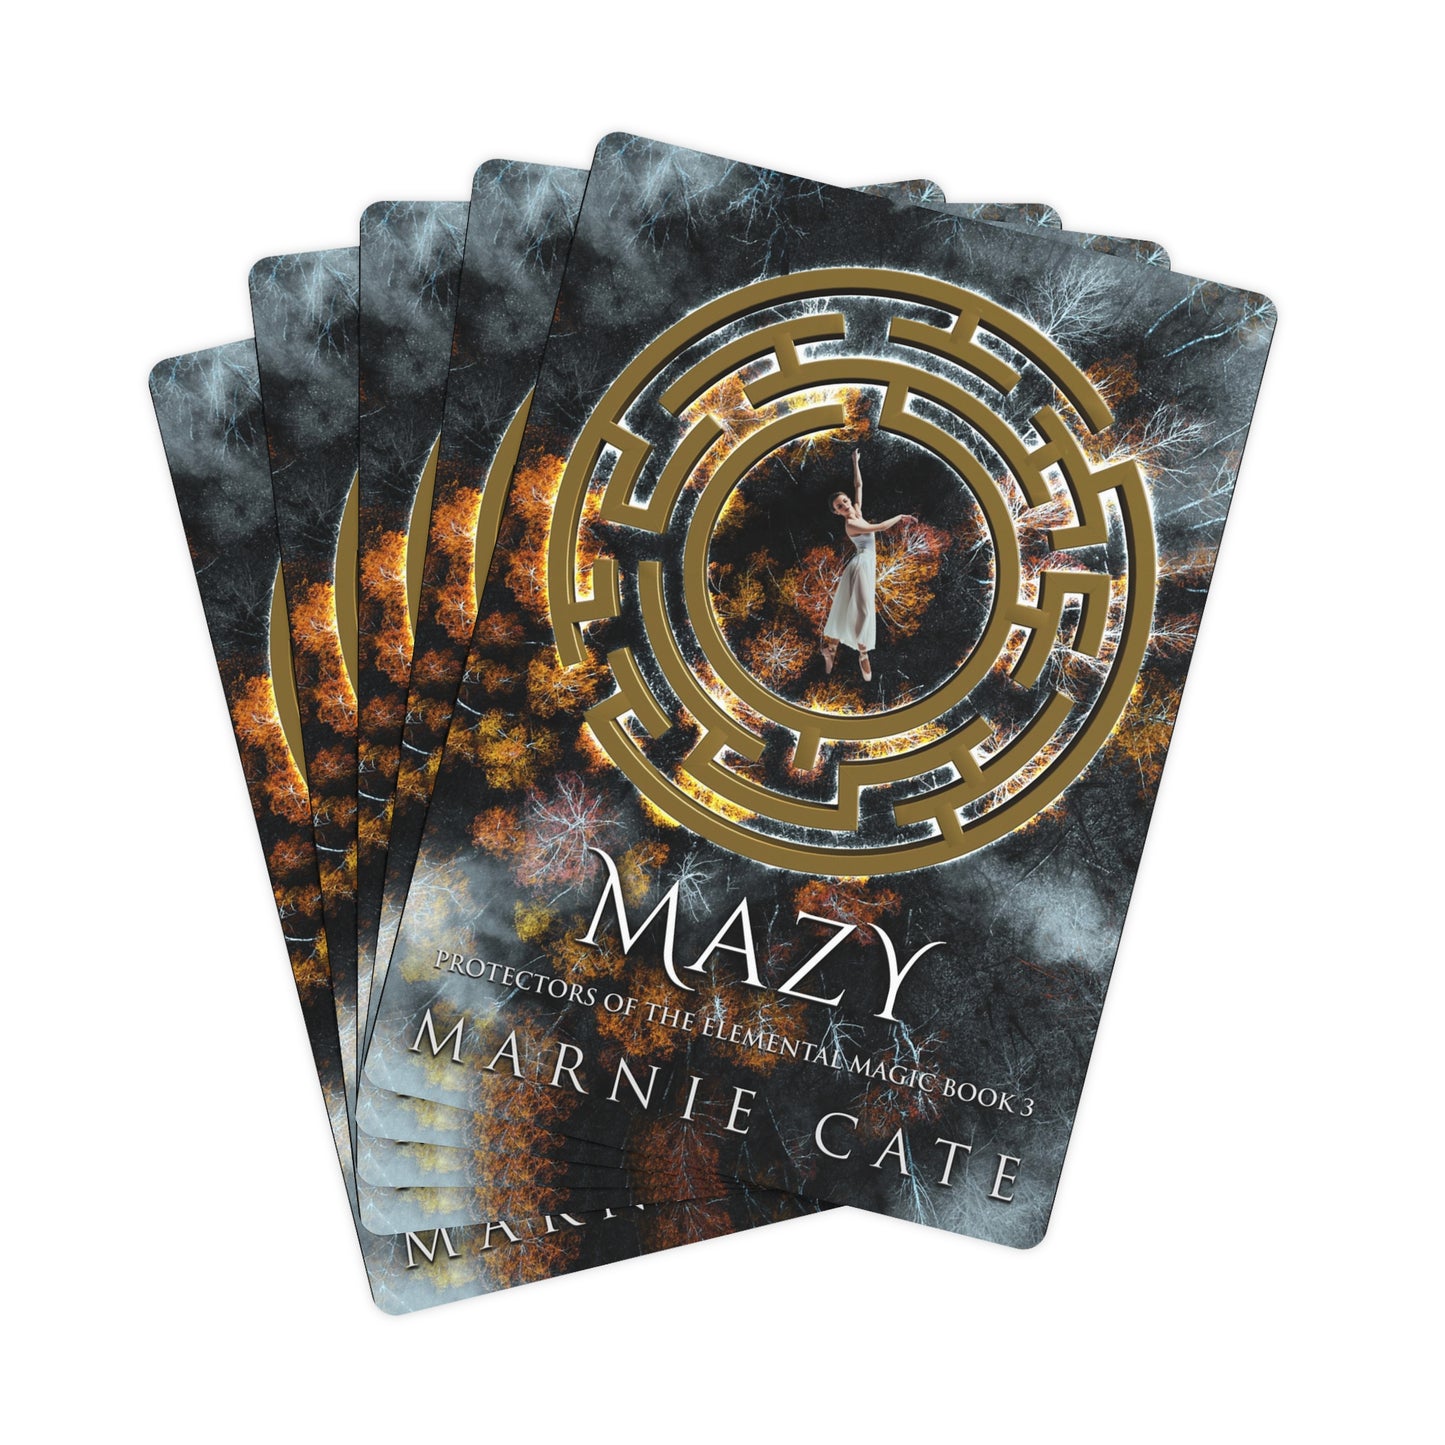 Mazy - Playing Cards